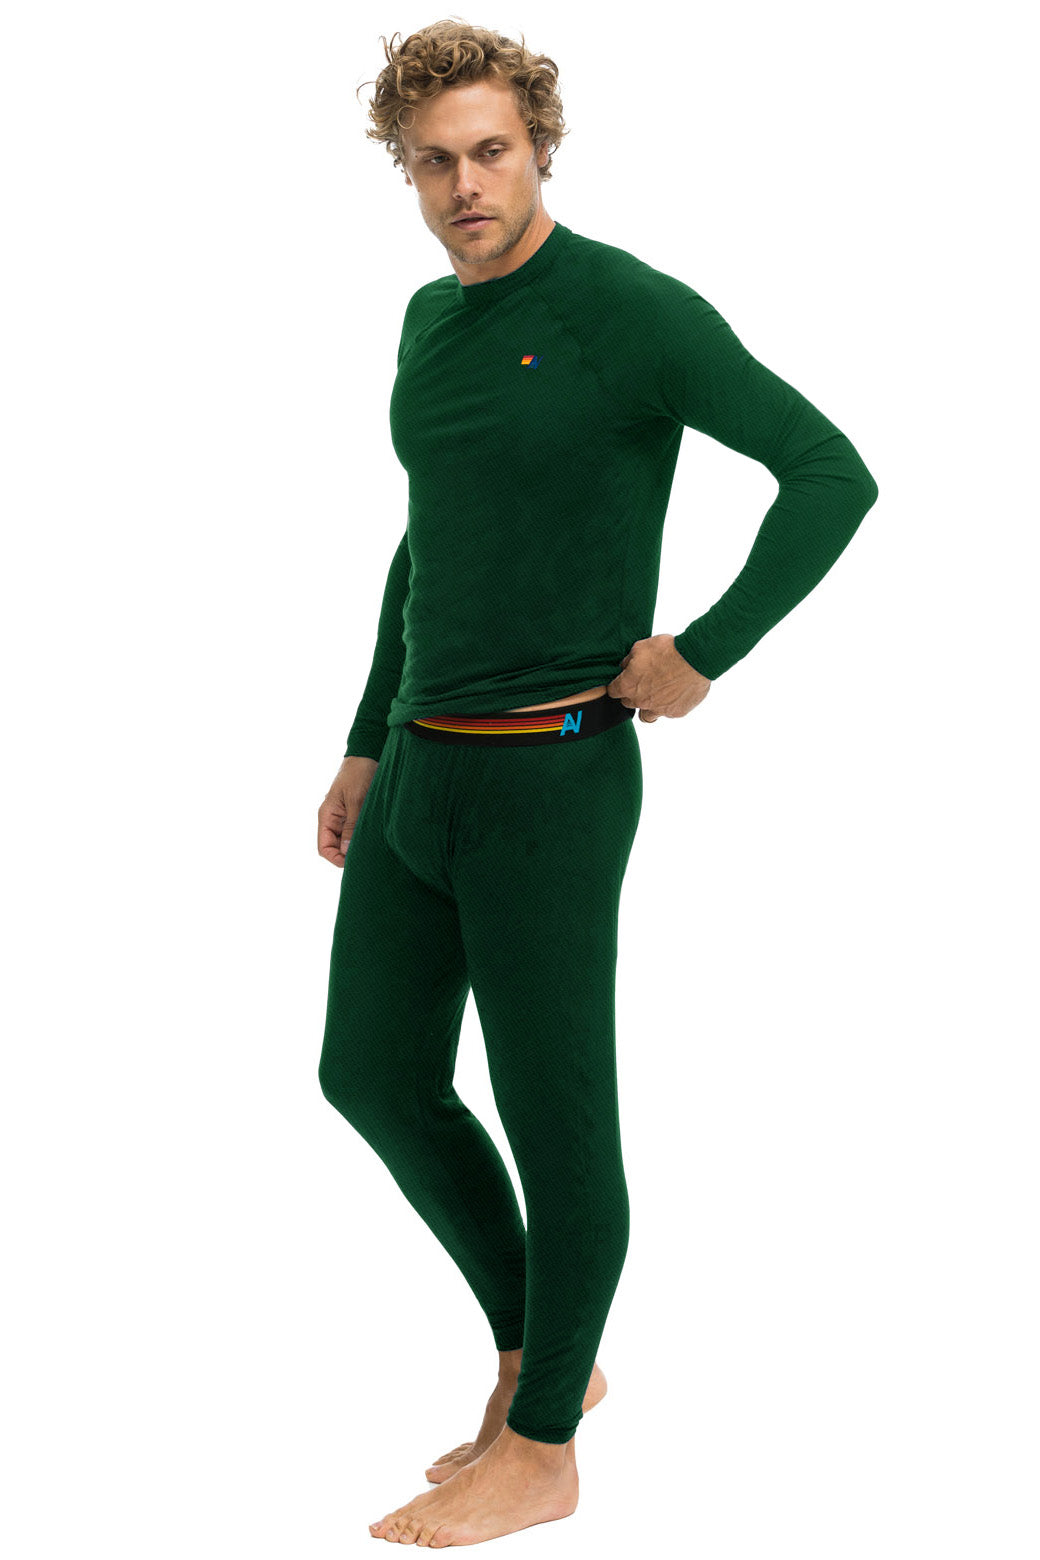 MEN'S THERMAL BASE LAYER SET - FOREST BASE LAYER Aviator Nation 